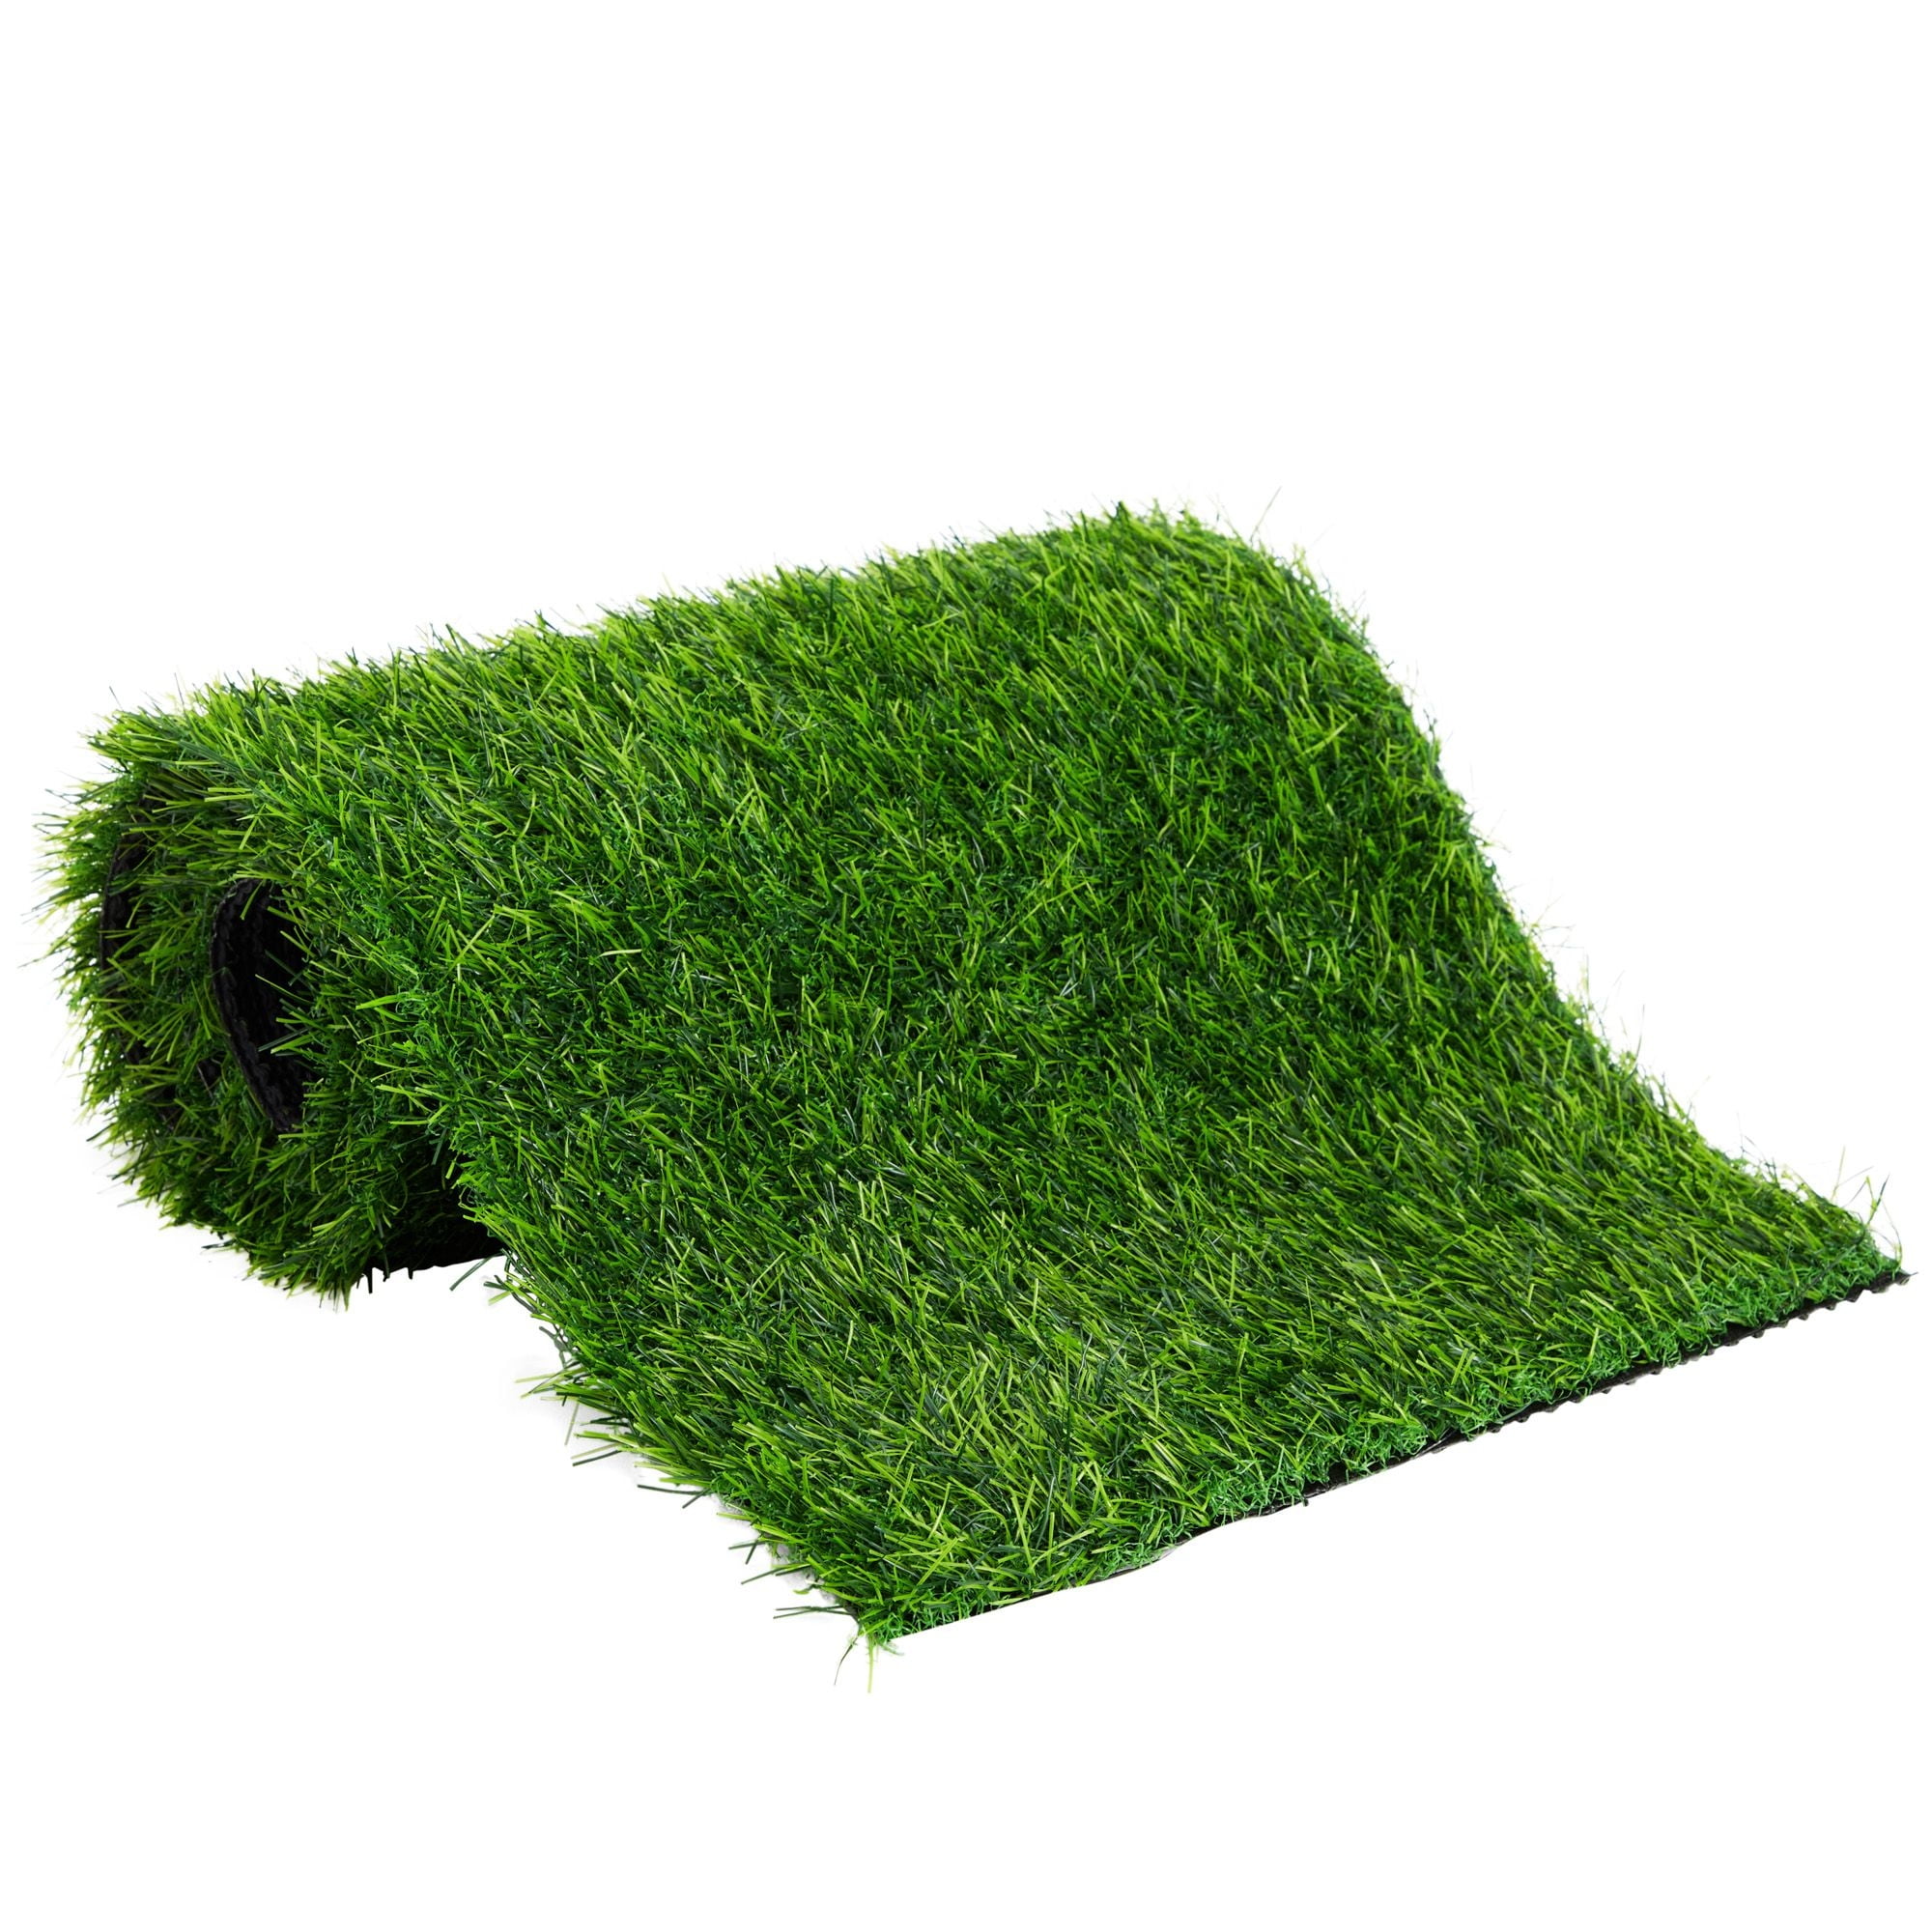 1 Roll Simulation Grass Table Runner, Hawaiian Party Table Decoration,  Outdoor Wedding Desktop Decoration, Green Artificial Turf Tablecloth,For  Picnic